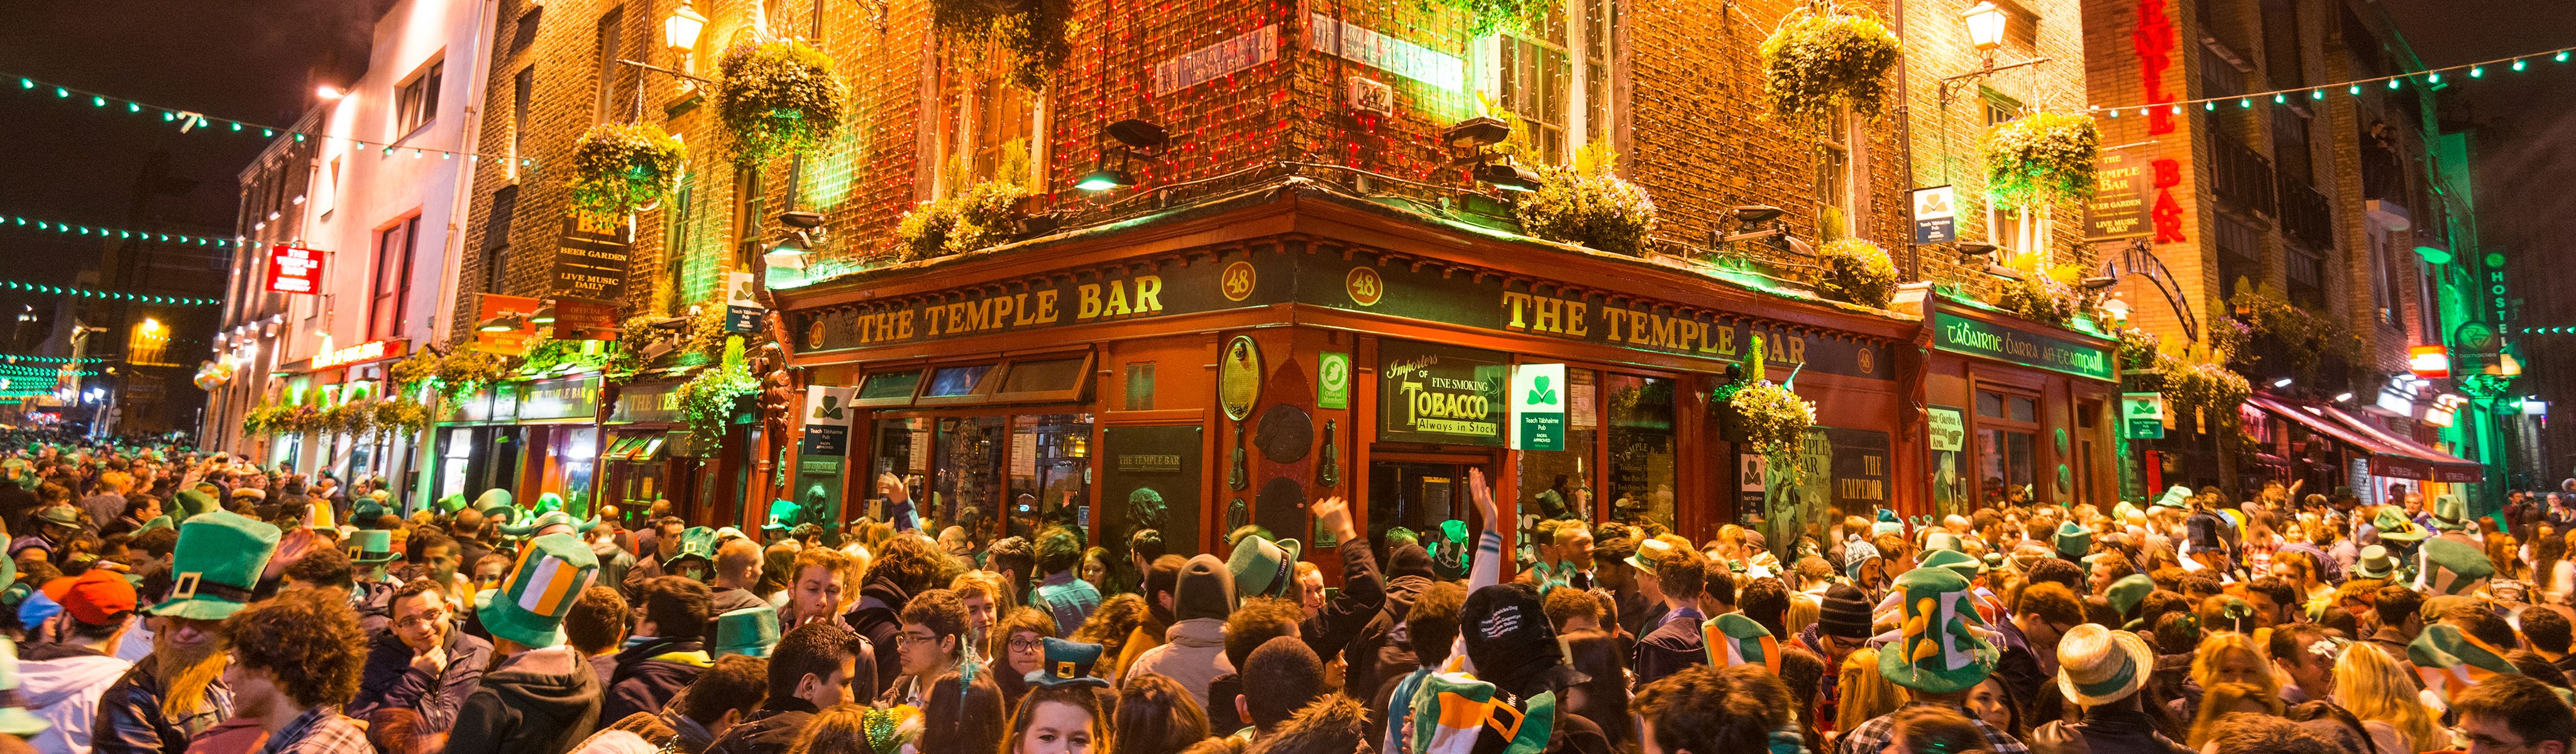 St. Patrick’s Day in Ireland Traditions of the Emerald Isle EF Go